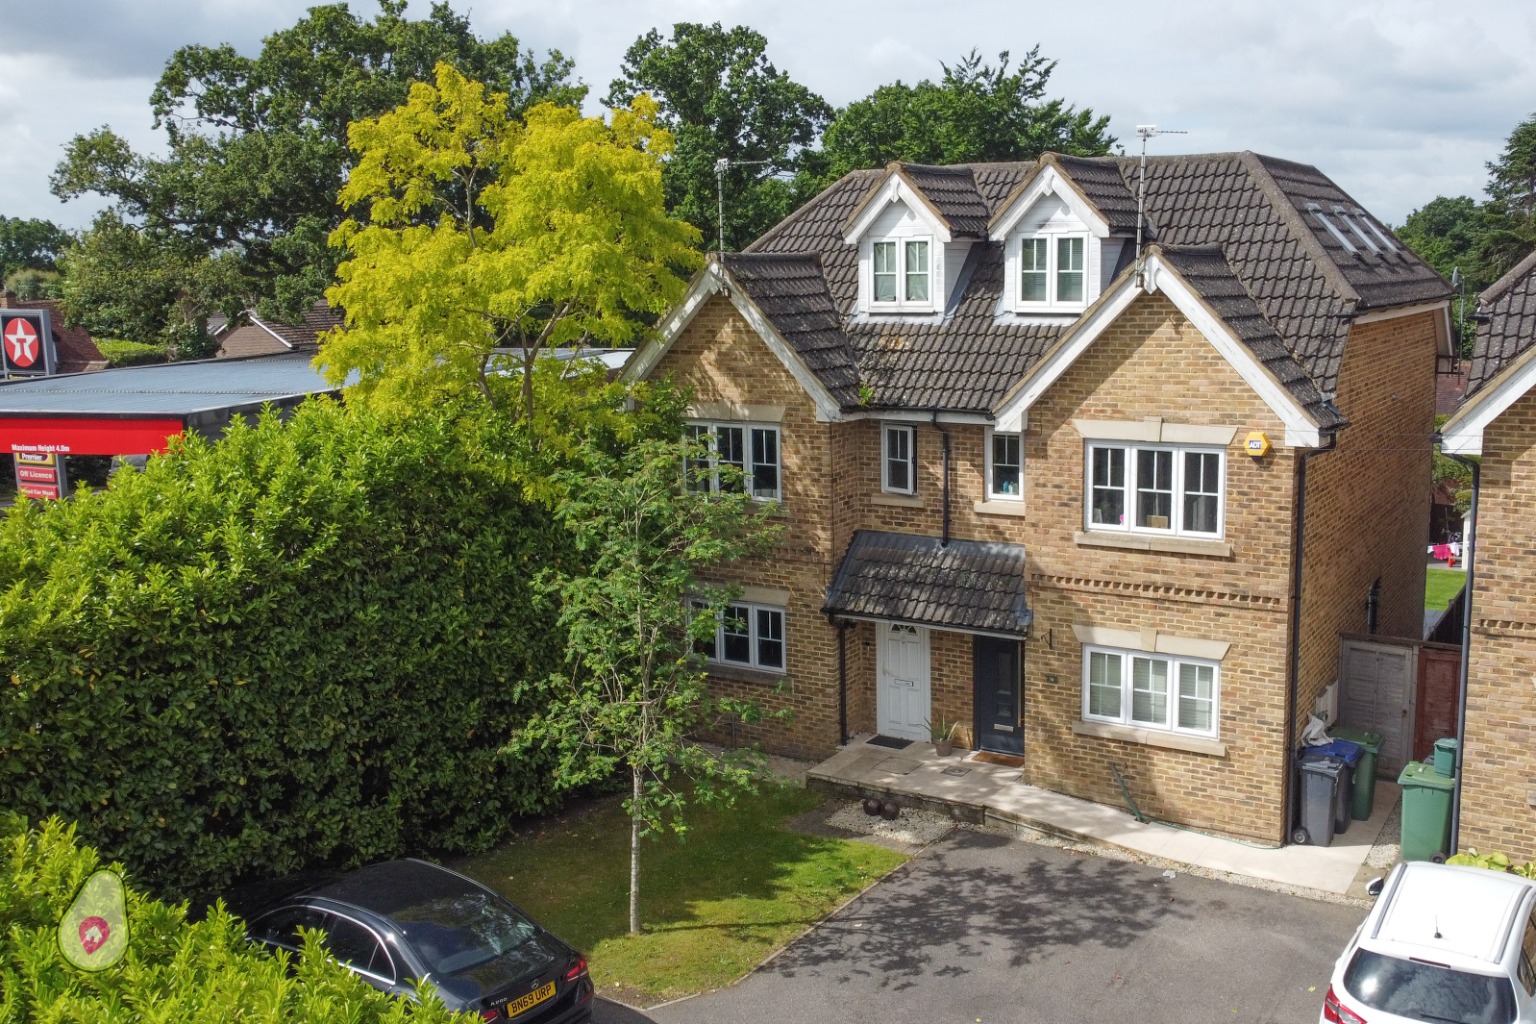 Situated in a convenient location within the catchment area for some of the areas most popular schools, is this semi-detached four bedroom townhouse with the potential of being sold with no onward chain.